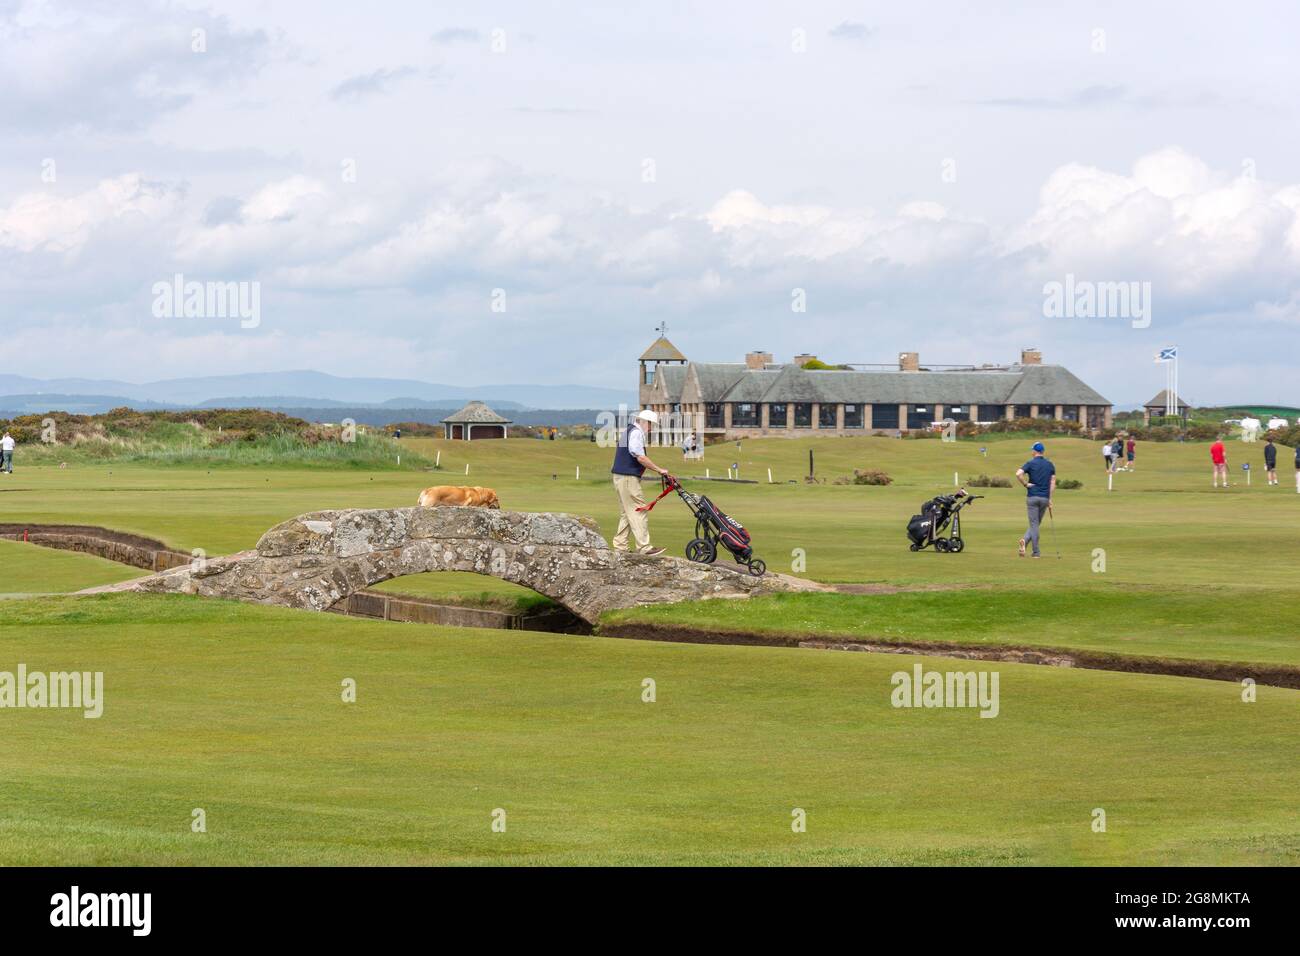 The Swilcan Bridge on 18th fairway, The Old Course, The Royal and Ancient Golf Club of St Andrews, St Andrews, Fife, Scotland, United Kingdom Stock Photo